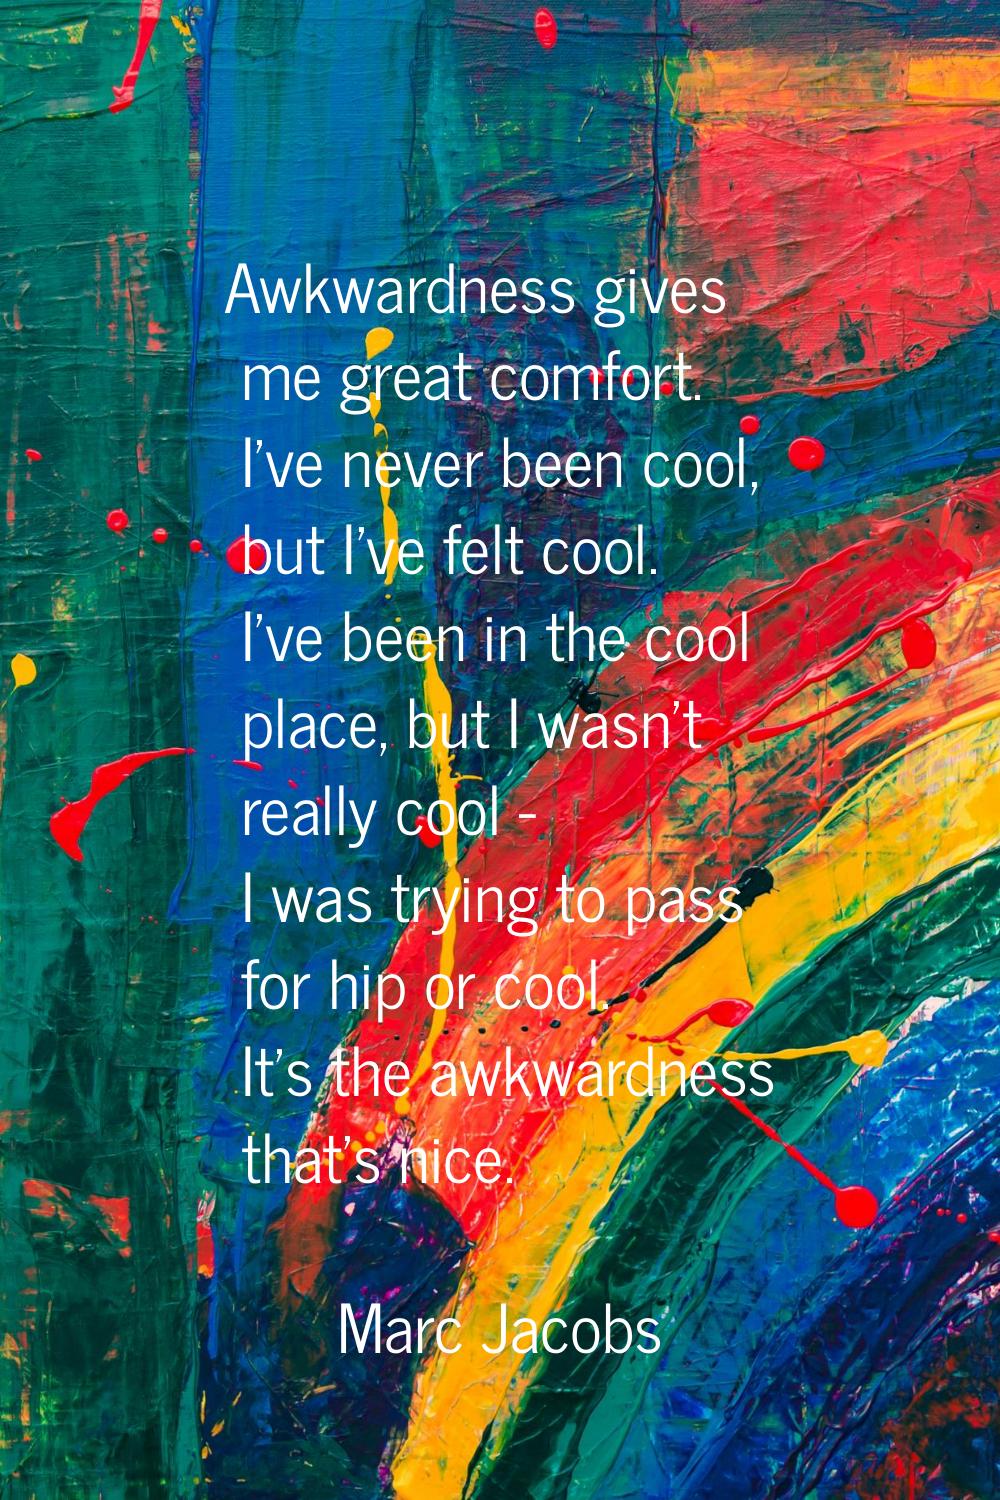 Awkwardness gives me great comfort. I've never been cool, but I've felt cool. I've been in the cool